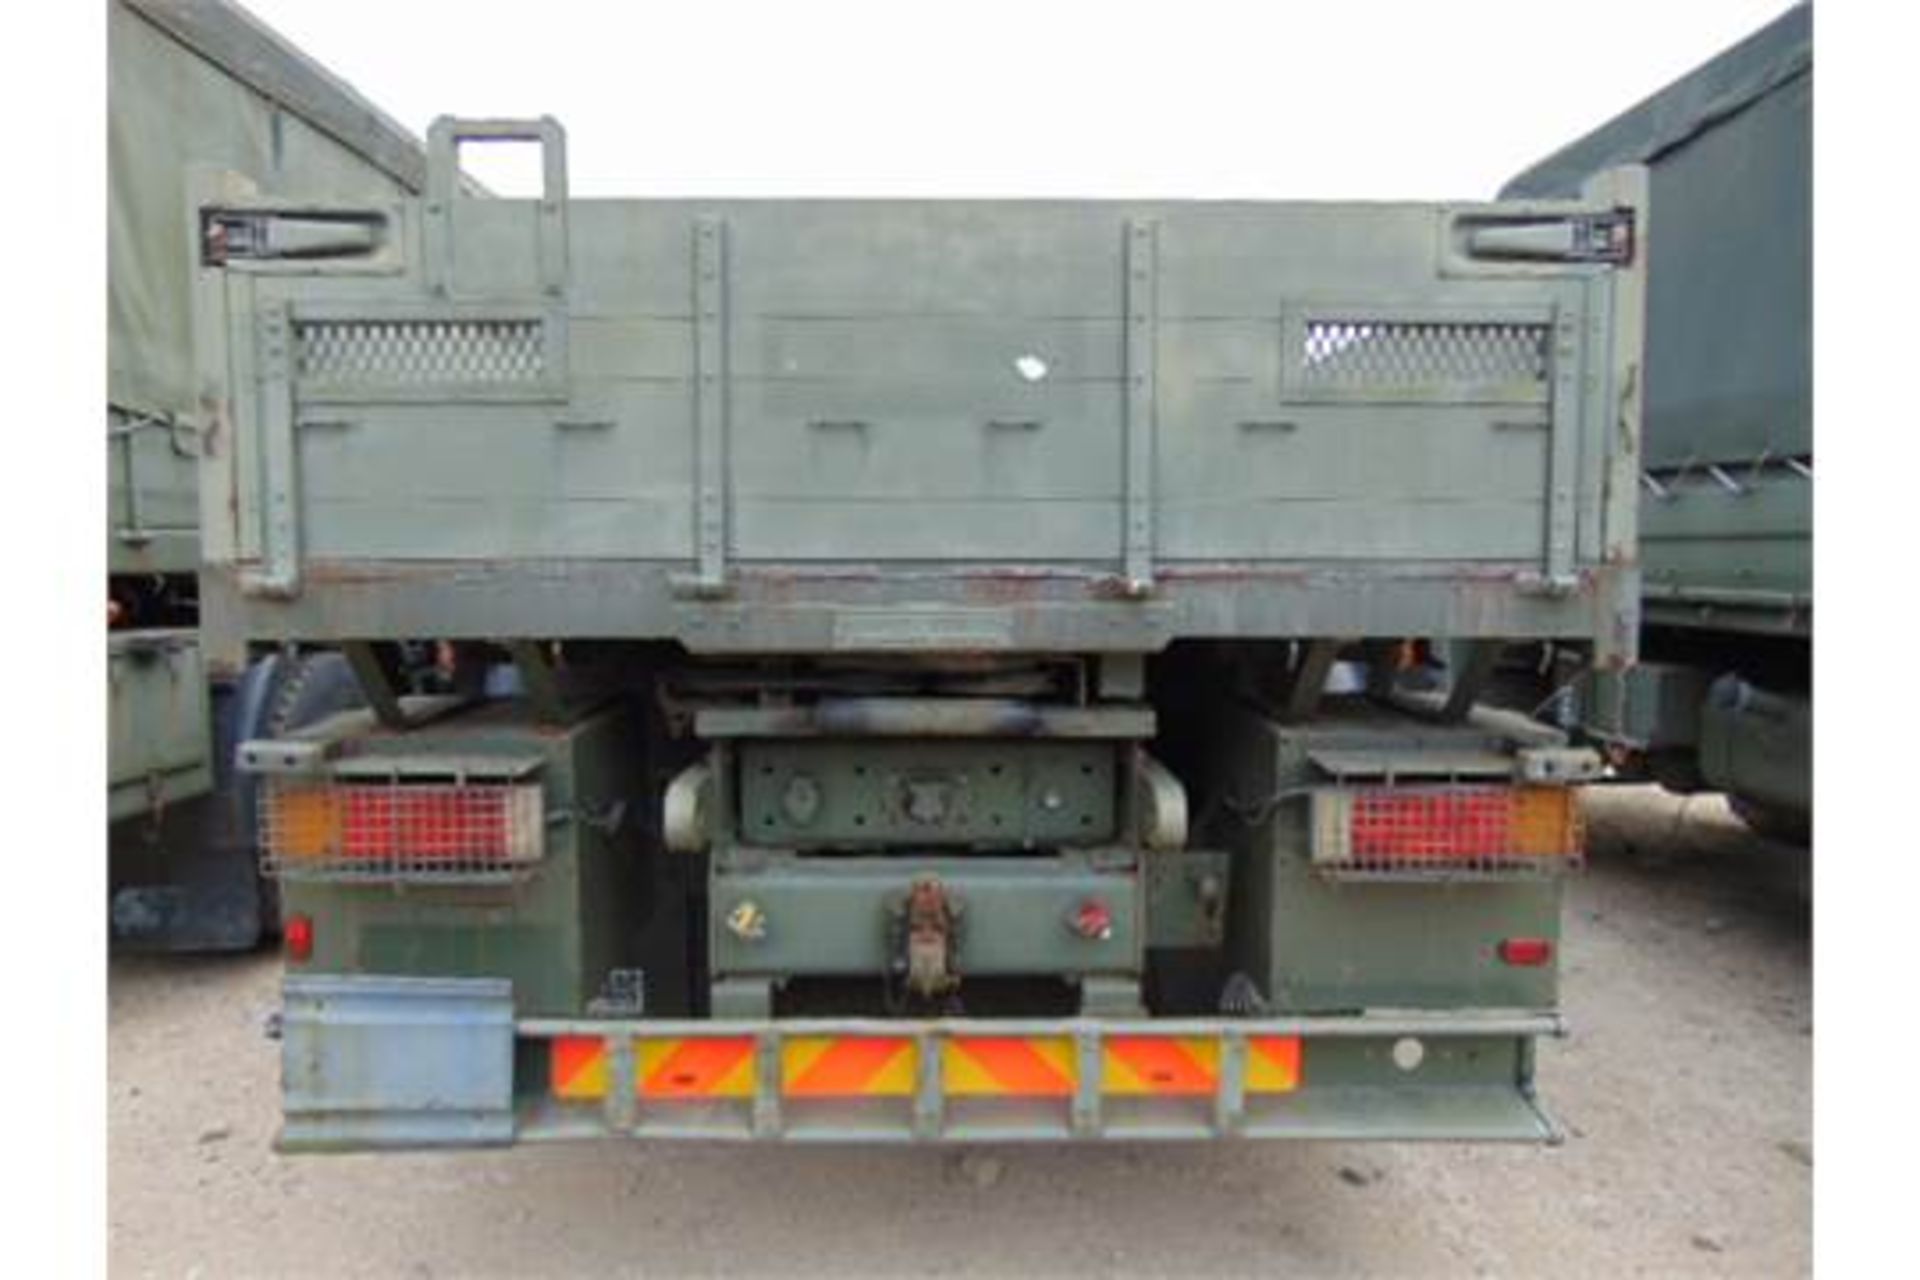 Renault G300 Maxter RHD 4x4 8T Cargo Truck with fitted winch - Image 5 of 15